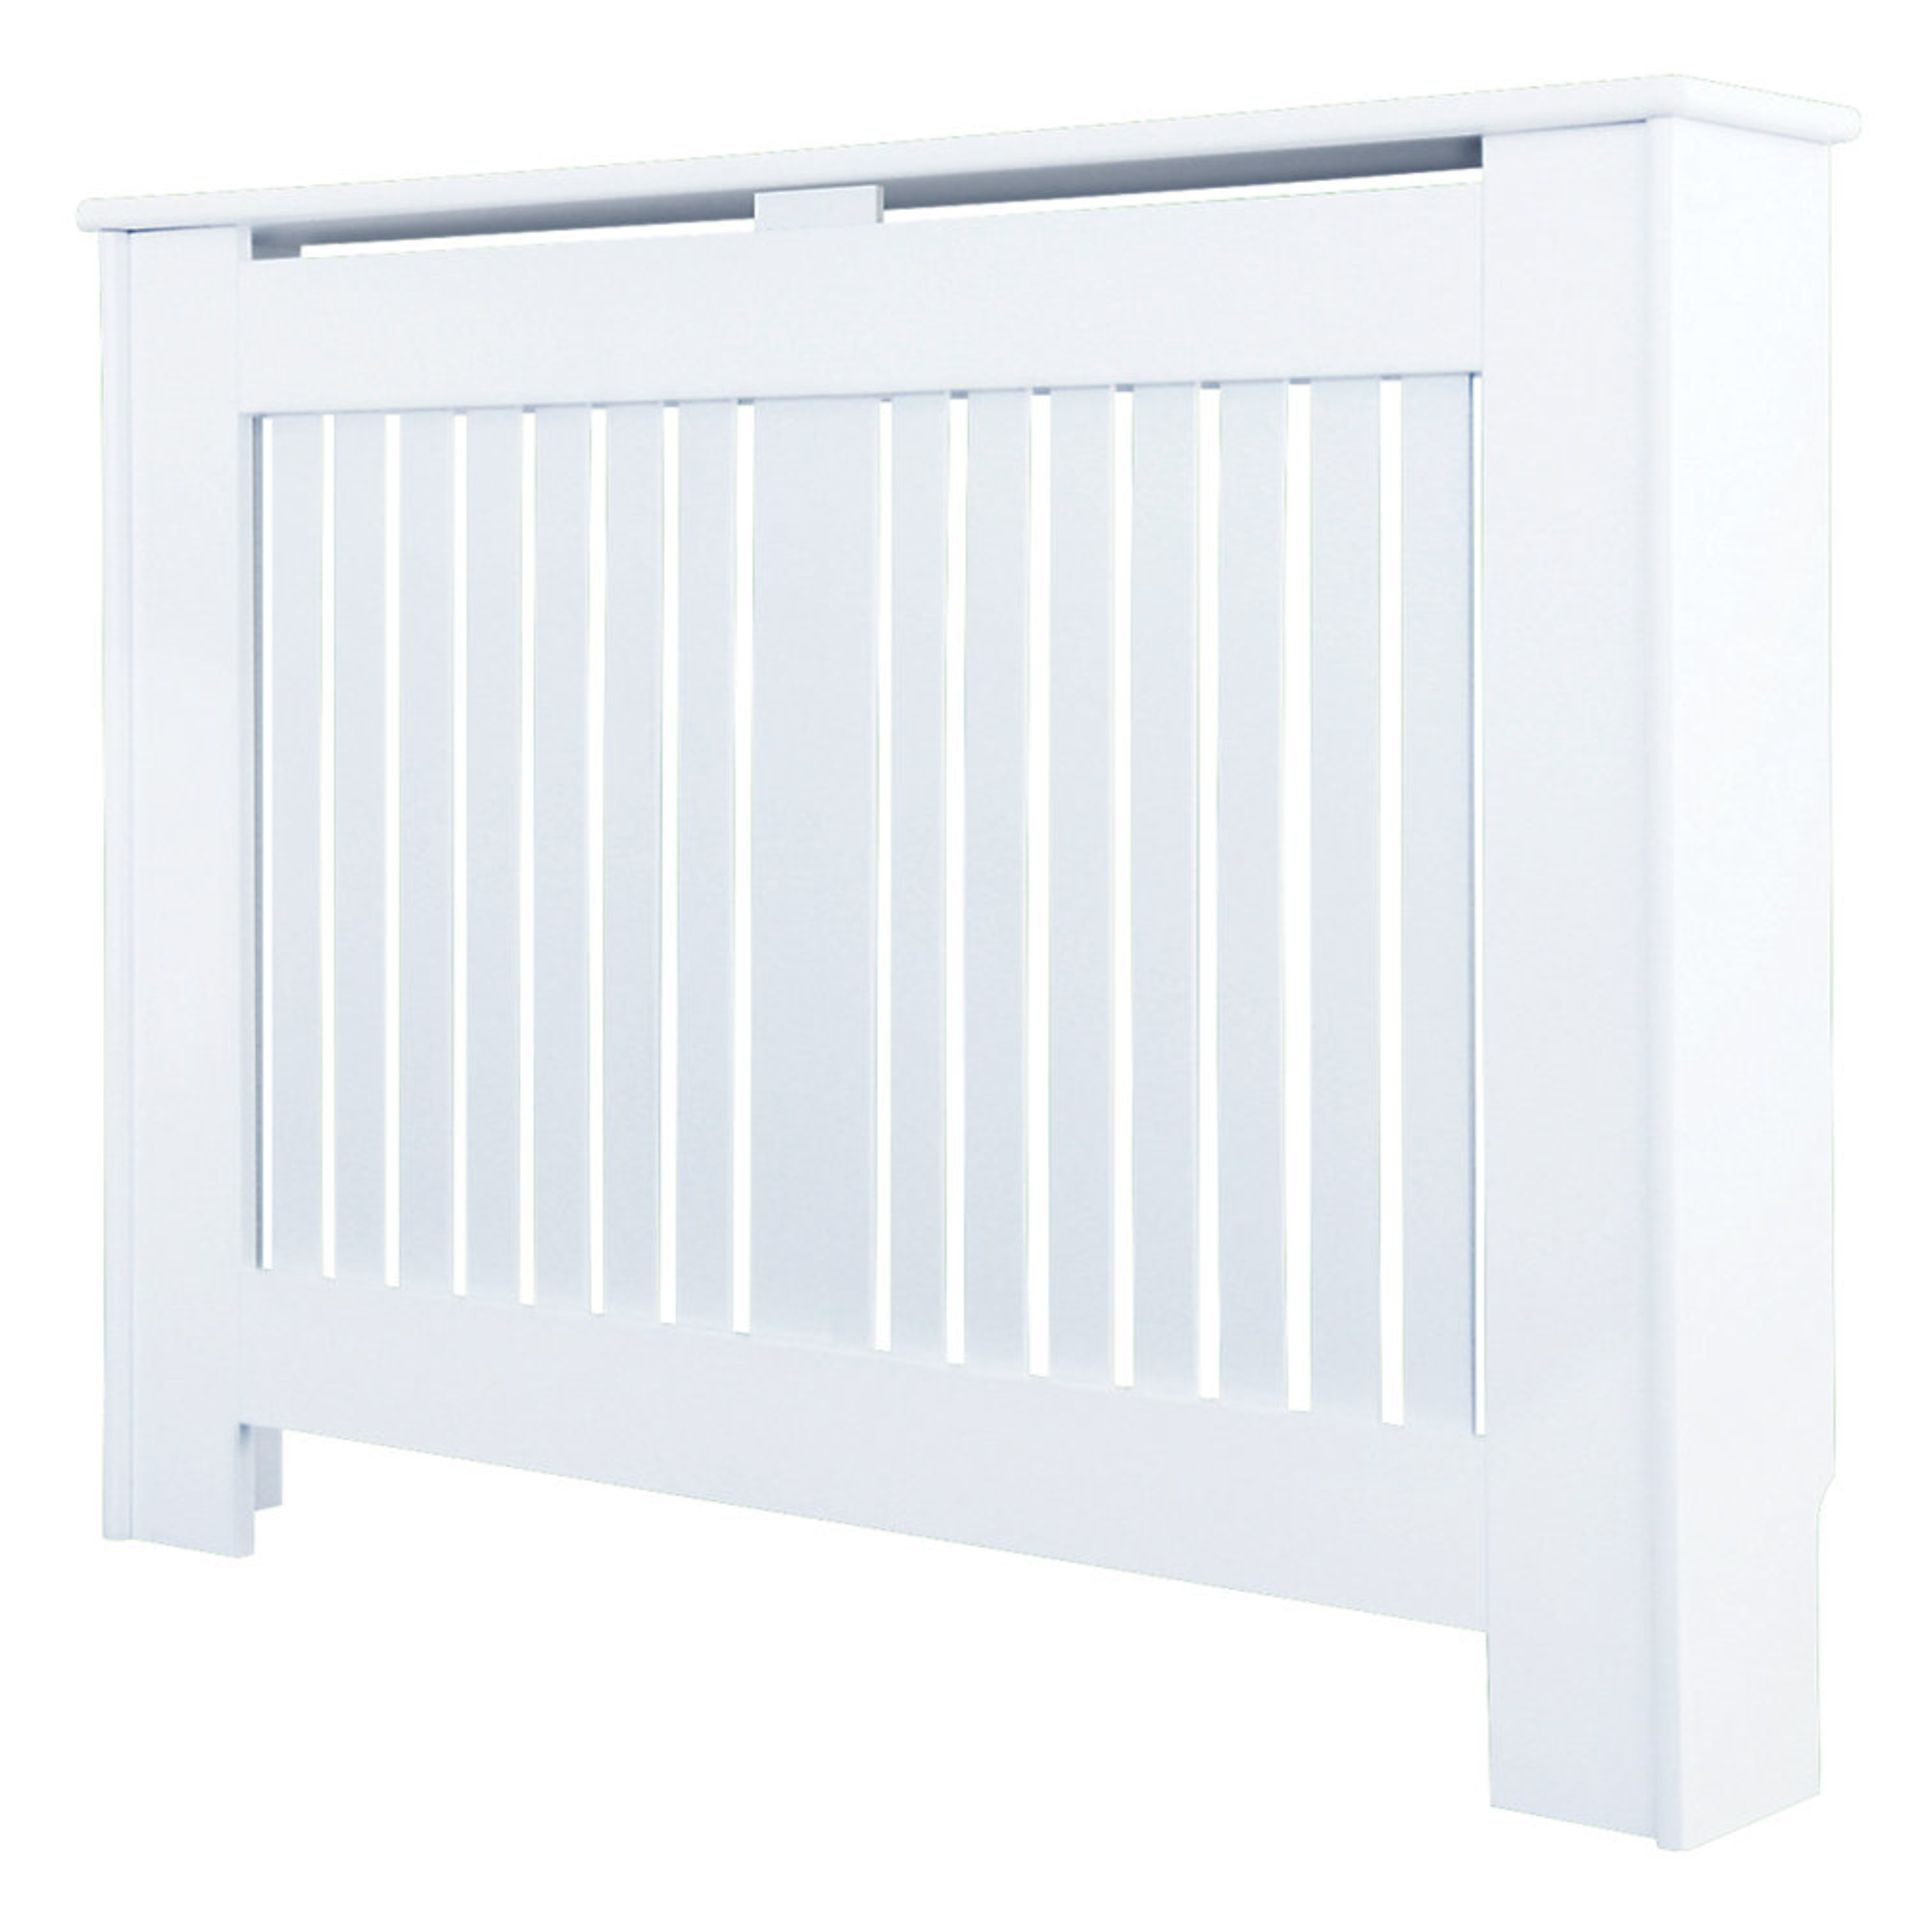 New (D137) Contemporary Kensington Radiator Cover Small White 1020 x 180 x 800mm . Ideal For Co... - Image 2 of 2